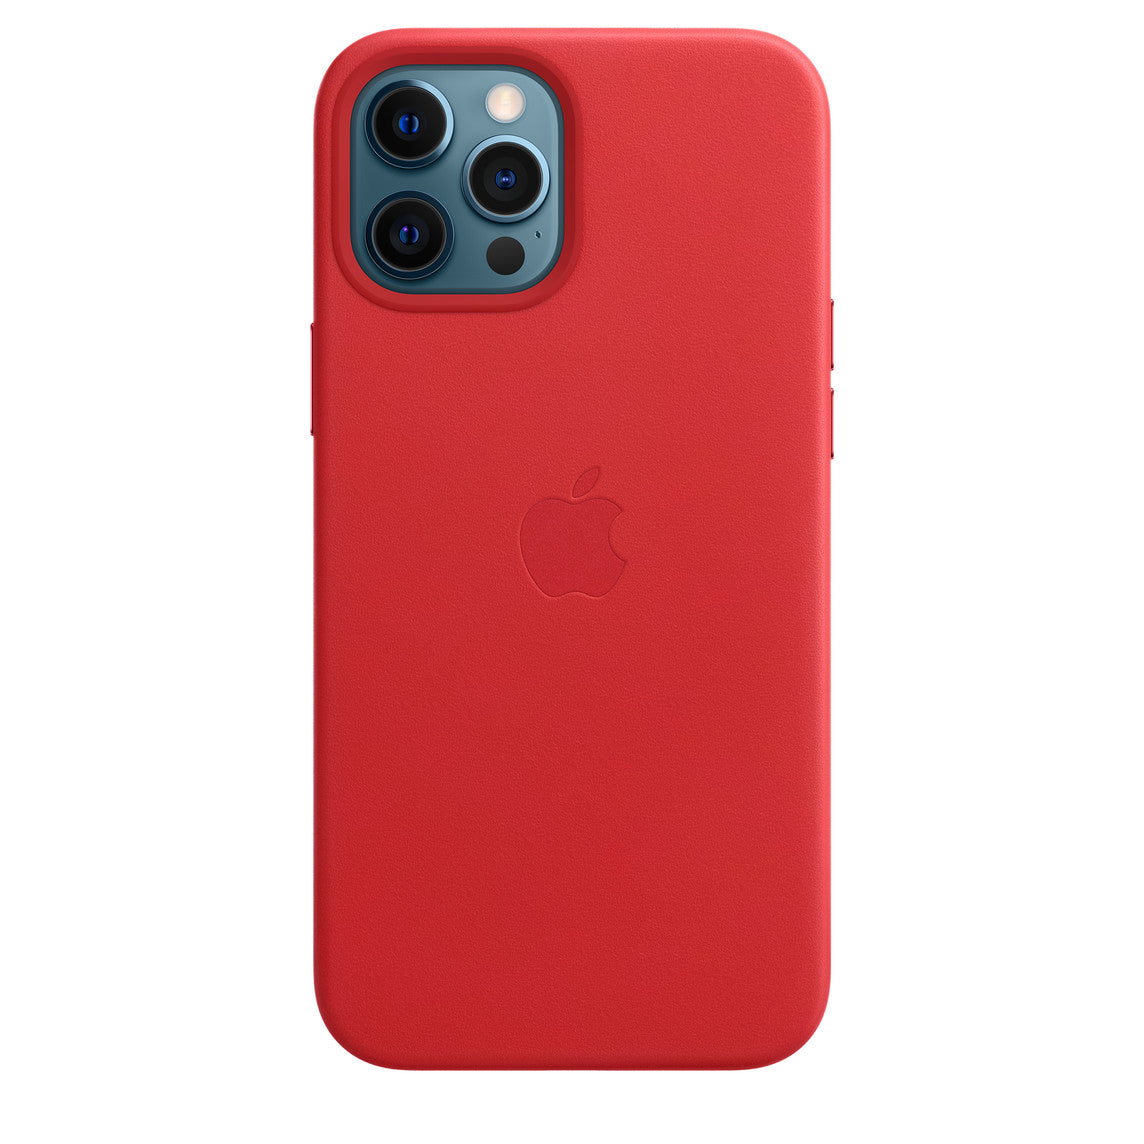 Genuine Apple iPhone 12 Pro Max leather case - Scarlet